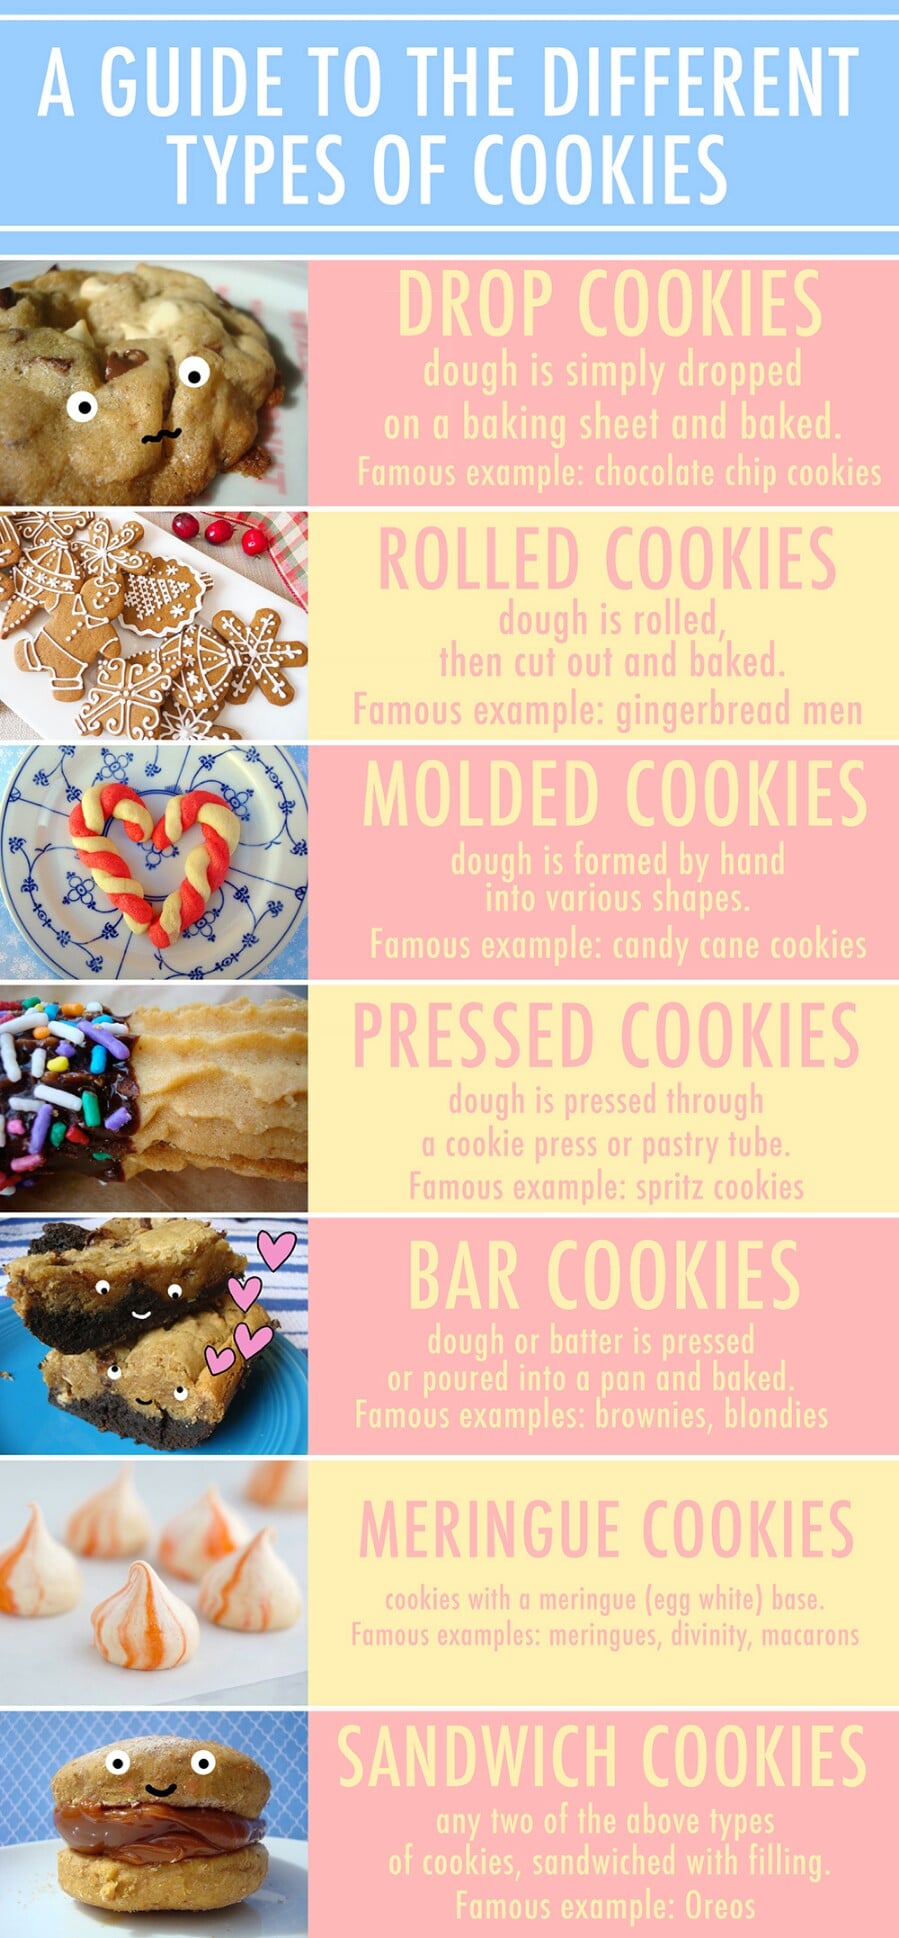 14. Check out a field guide to cookie taxonomy.